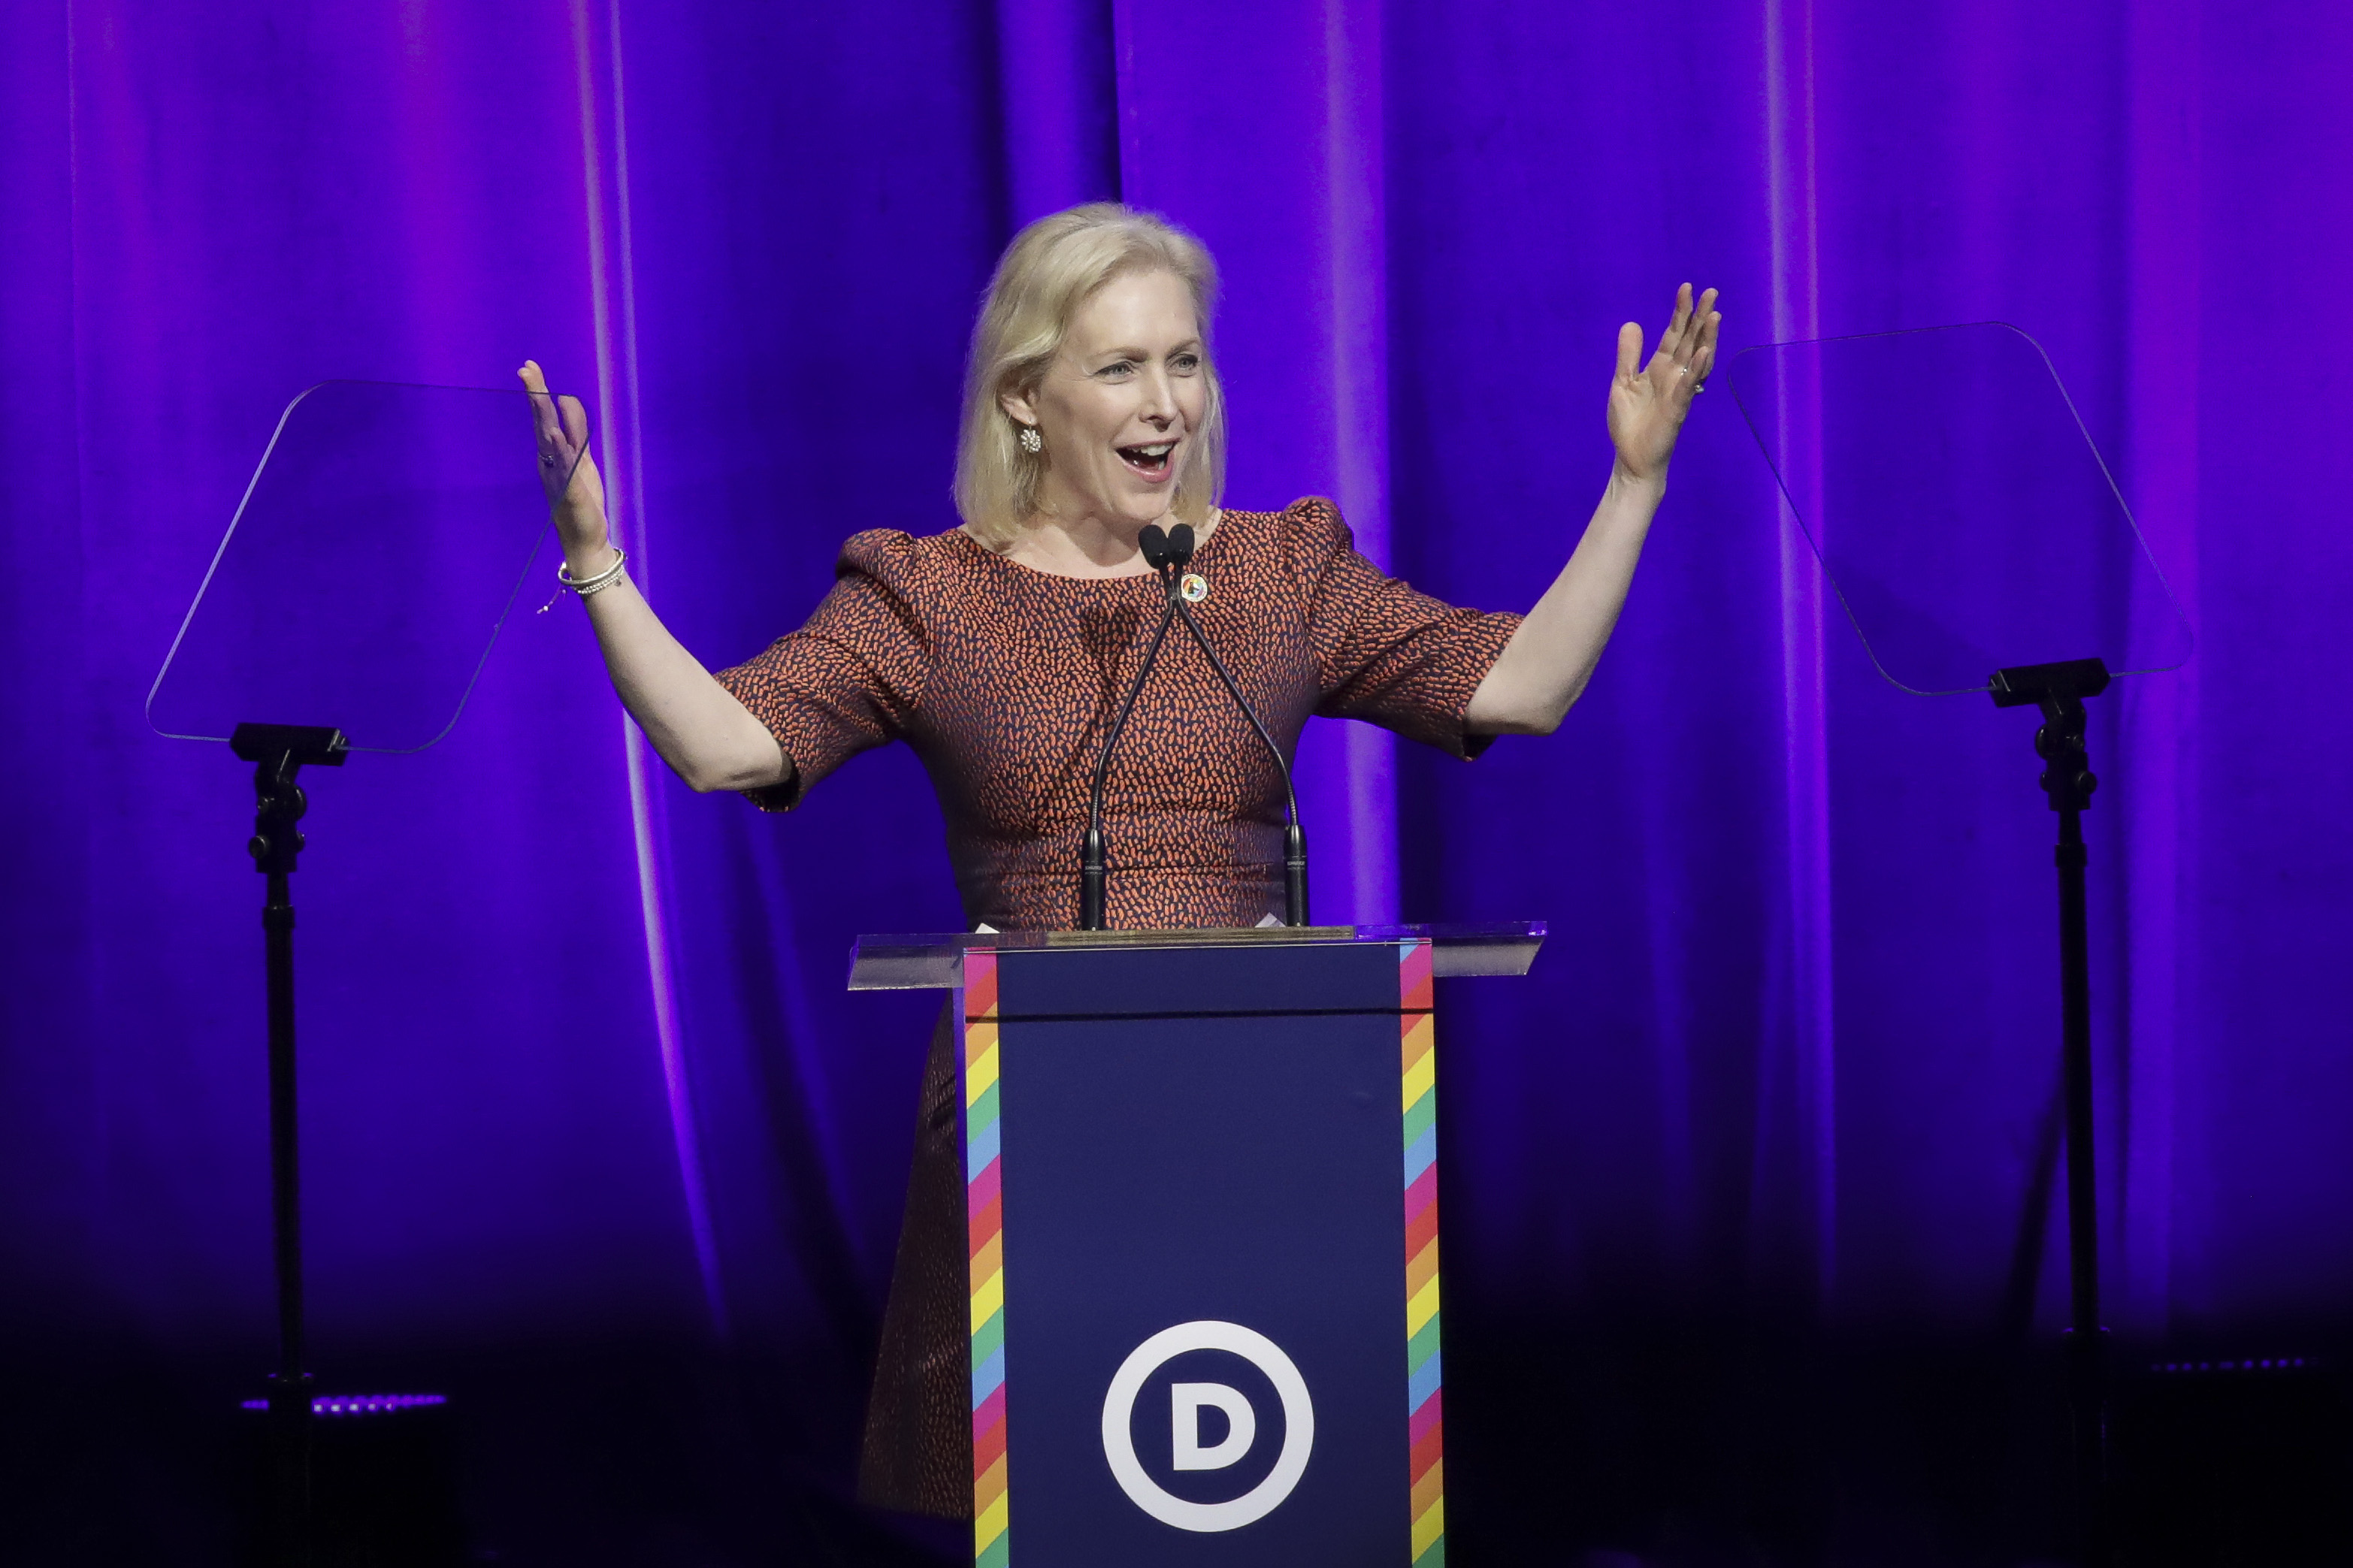 2020 Democratic presidential candidate Sen. Kirsten Gillibrand (D-NY) speaks at the Democratic National Committee's annual LGBTQ gala, a fundraising event. (Drew Angerer/Getty Images)